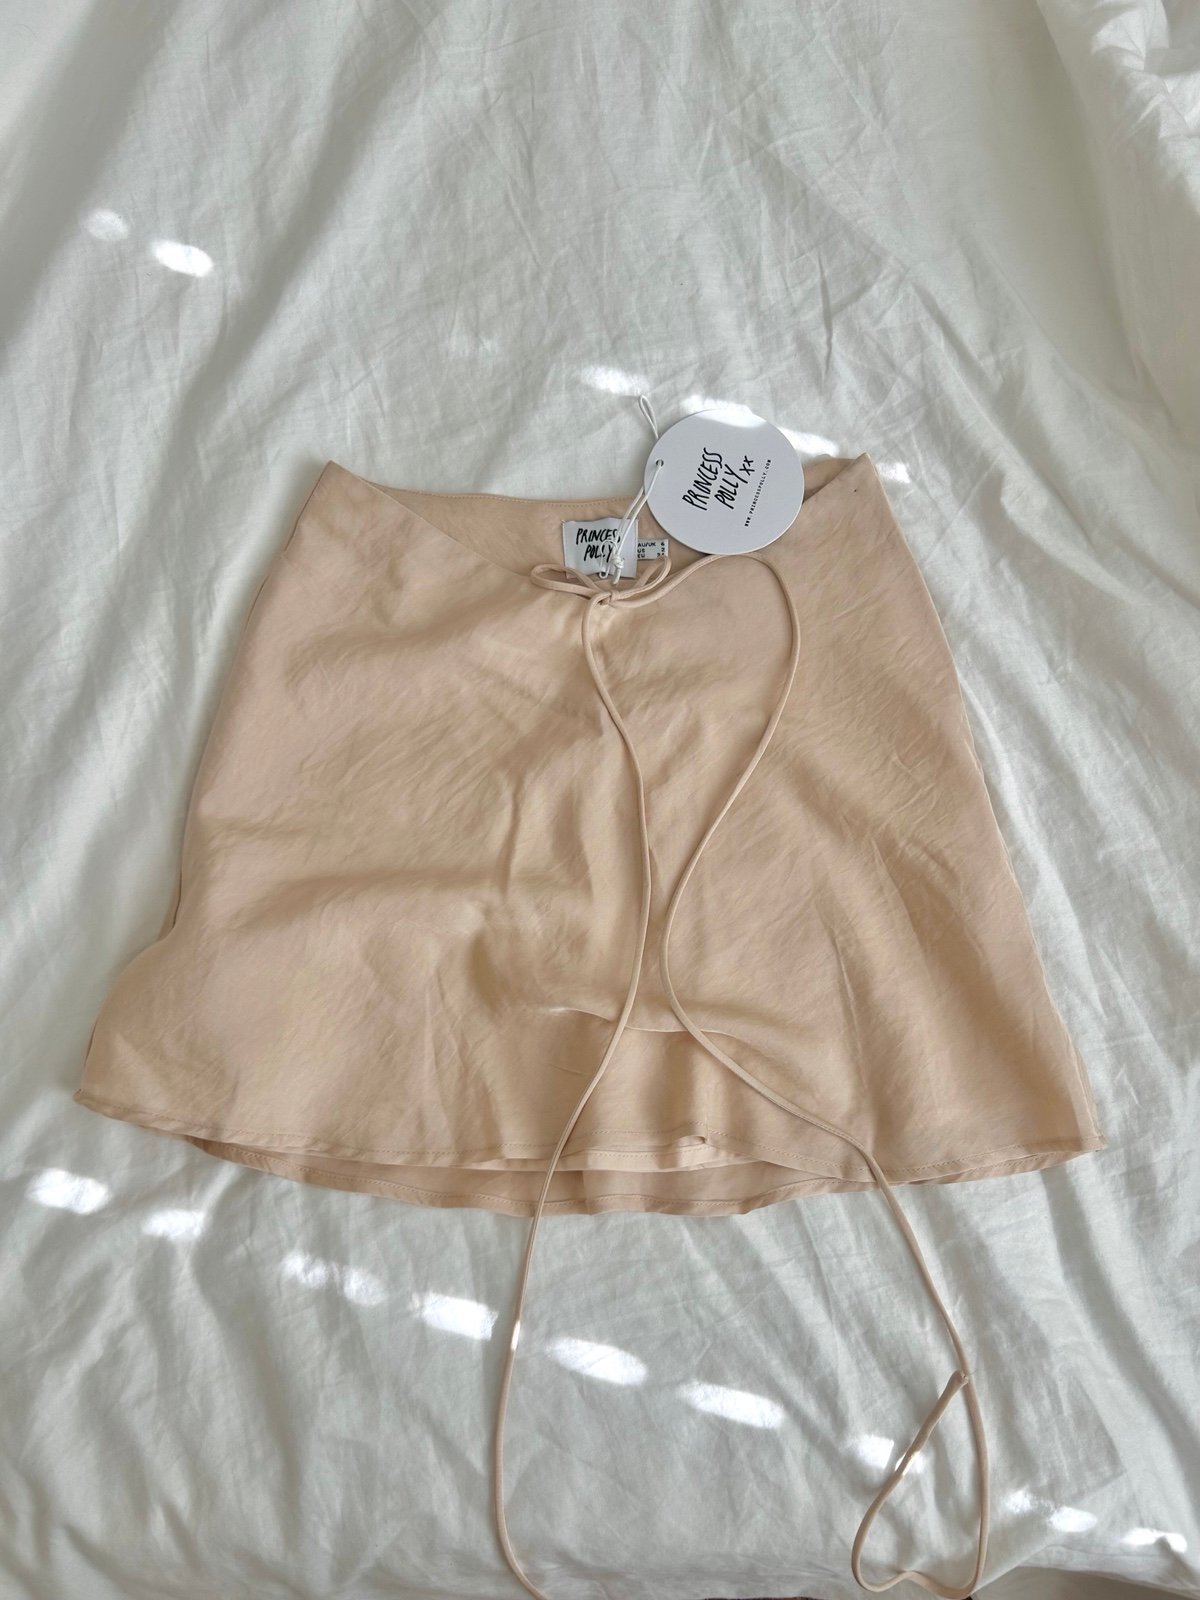 Special offer  princess polly mini skirt BRAND NEW WITH